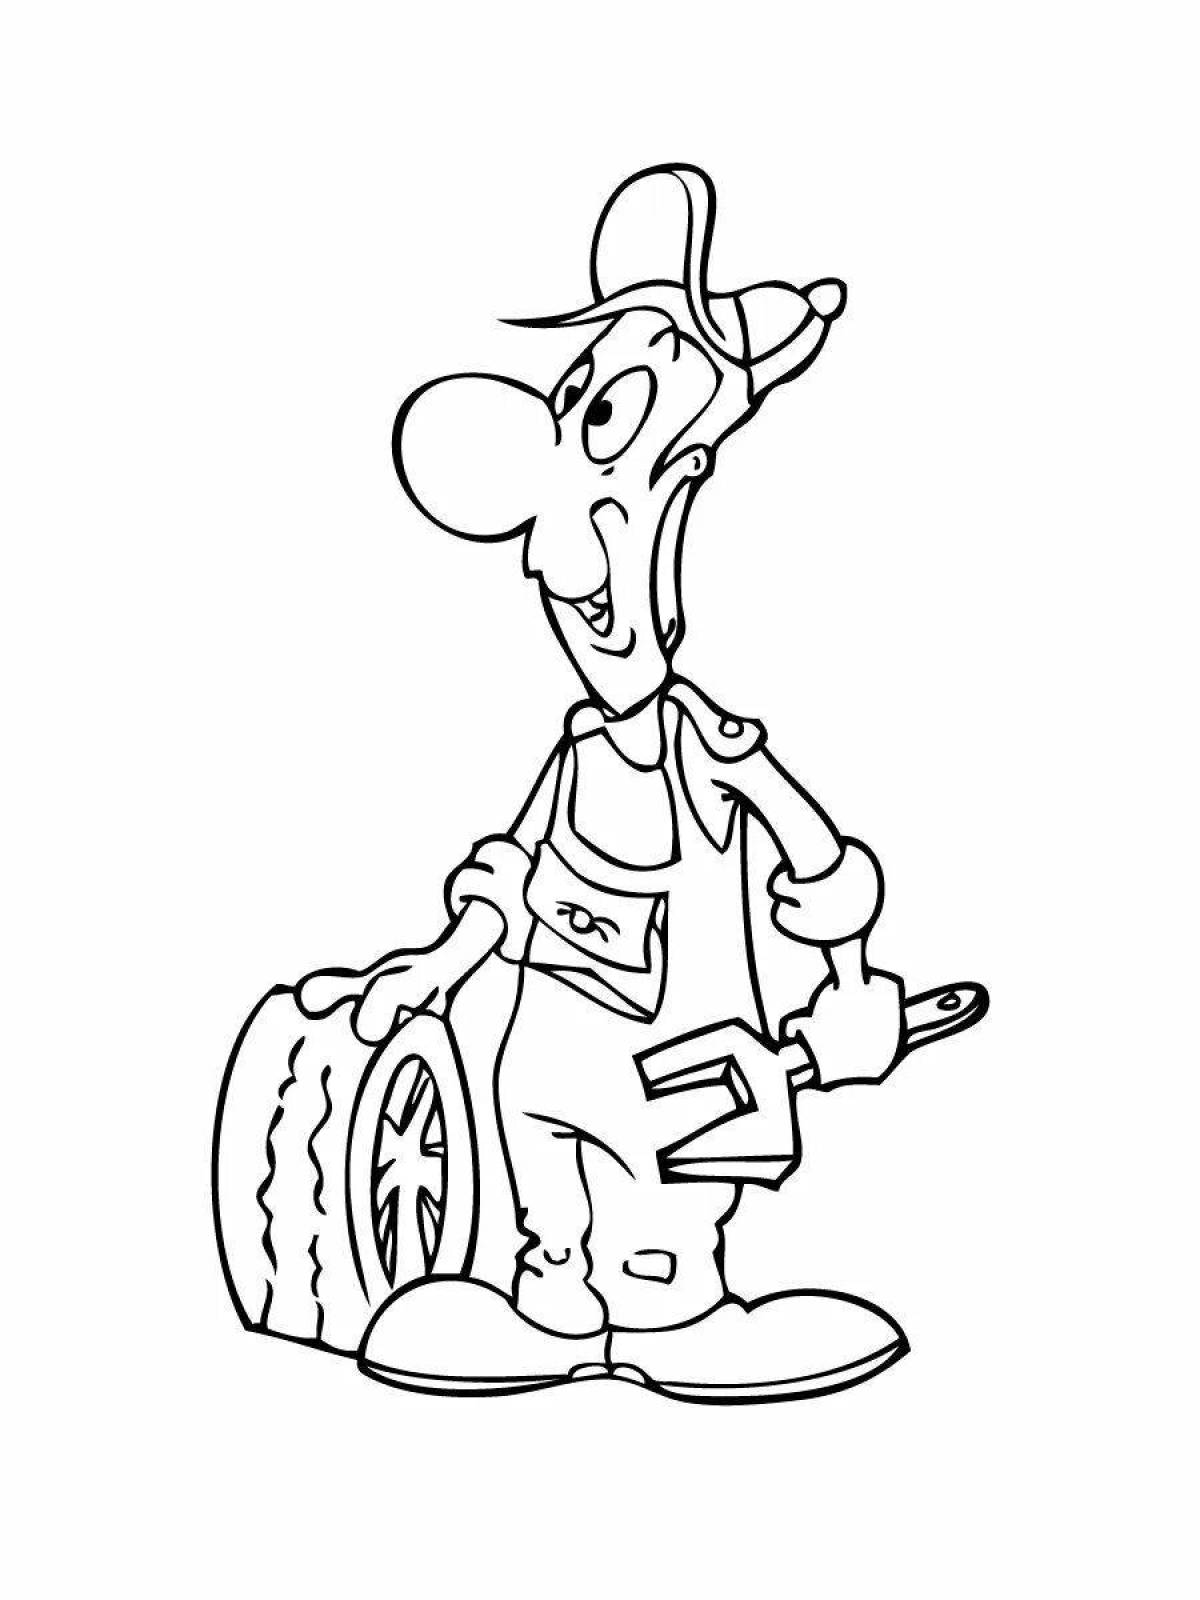 Gorgeous car mechanic coloring book for kids